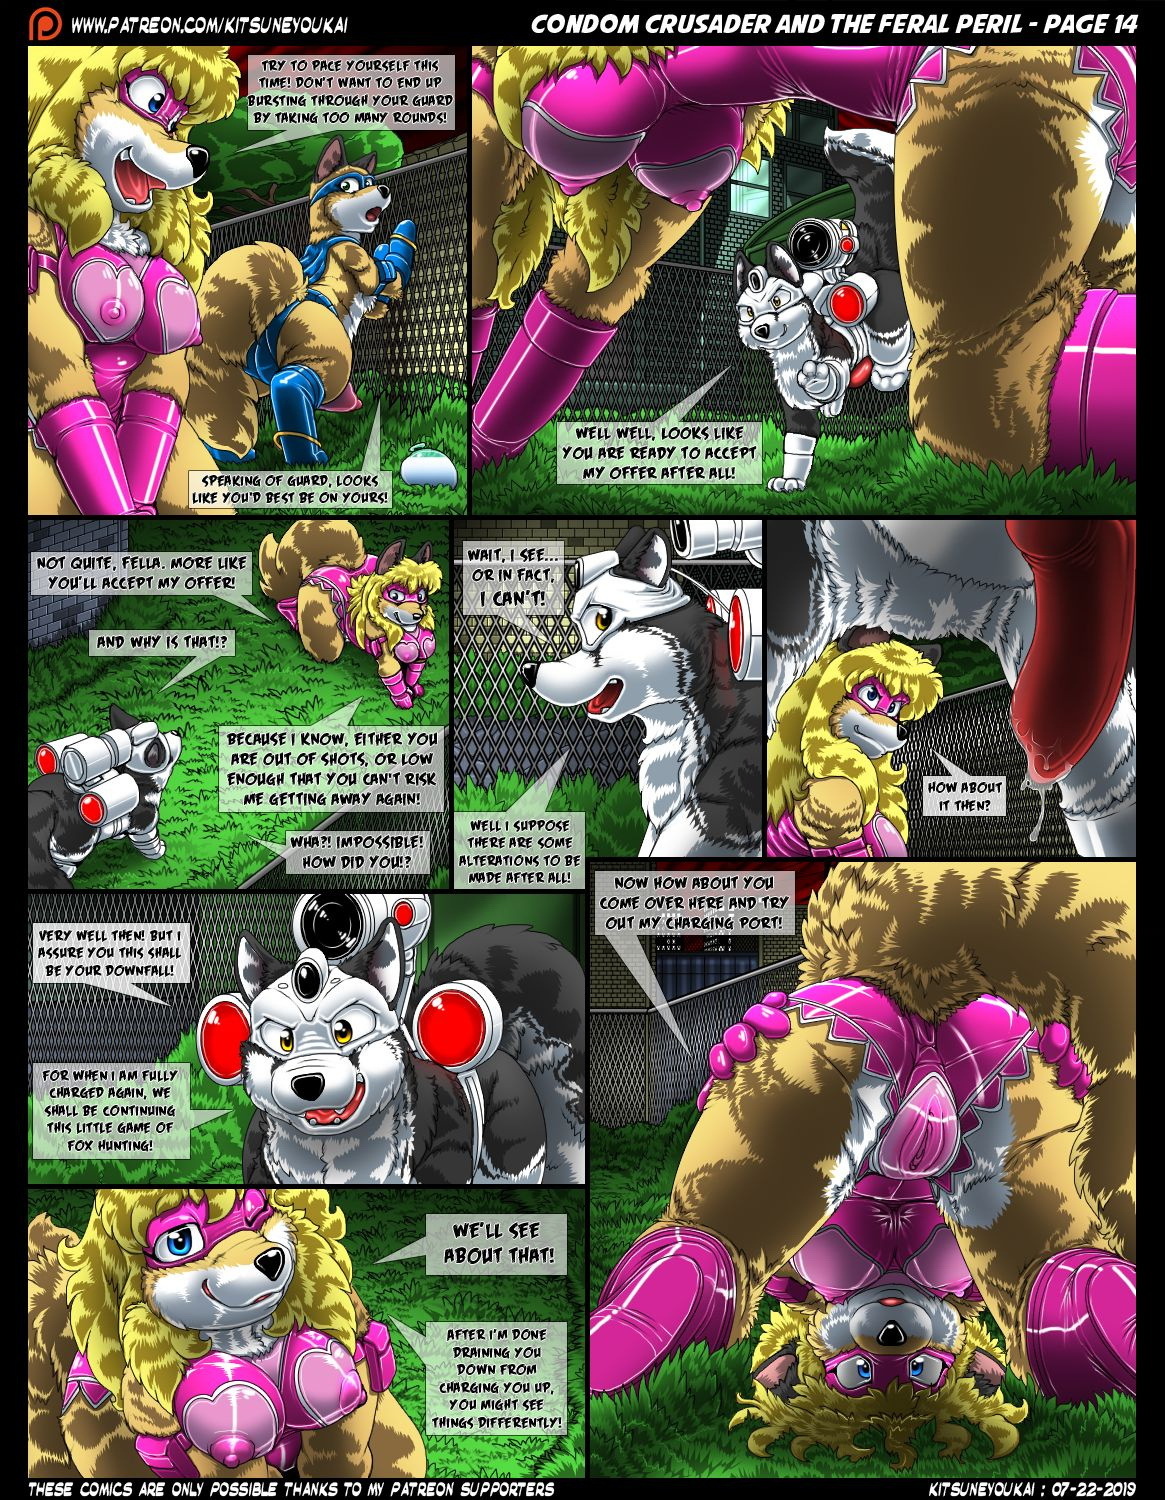 Condom Crusader and the Feral Peril - Page 14